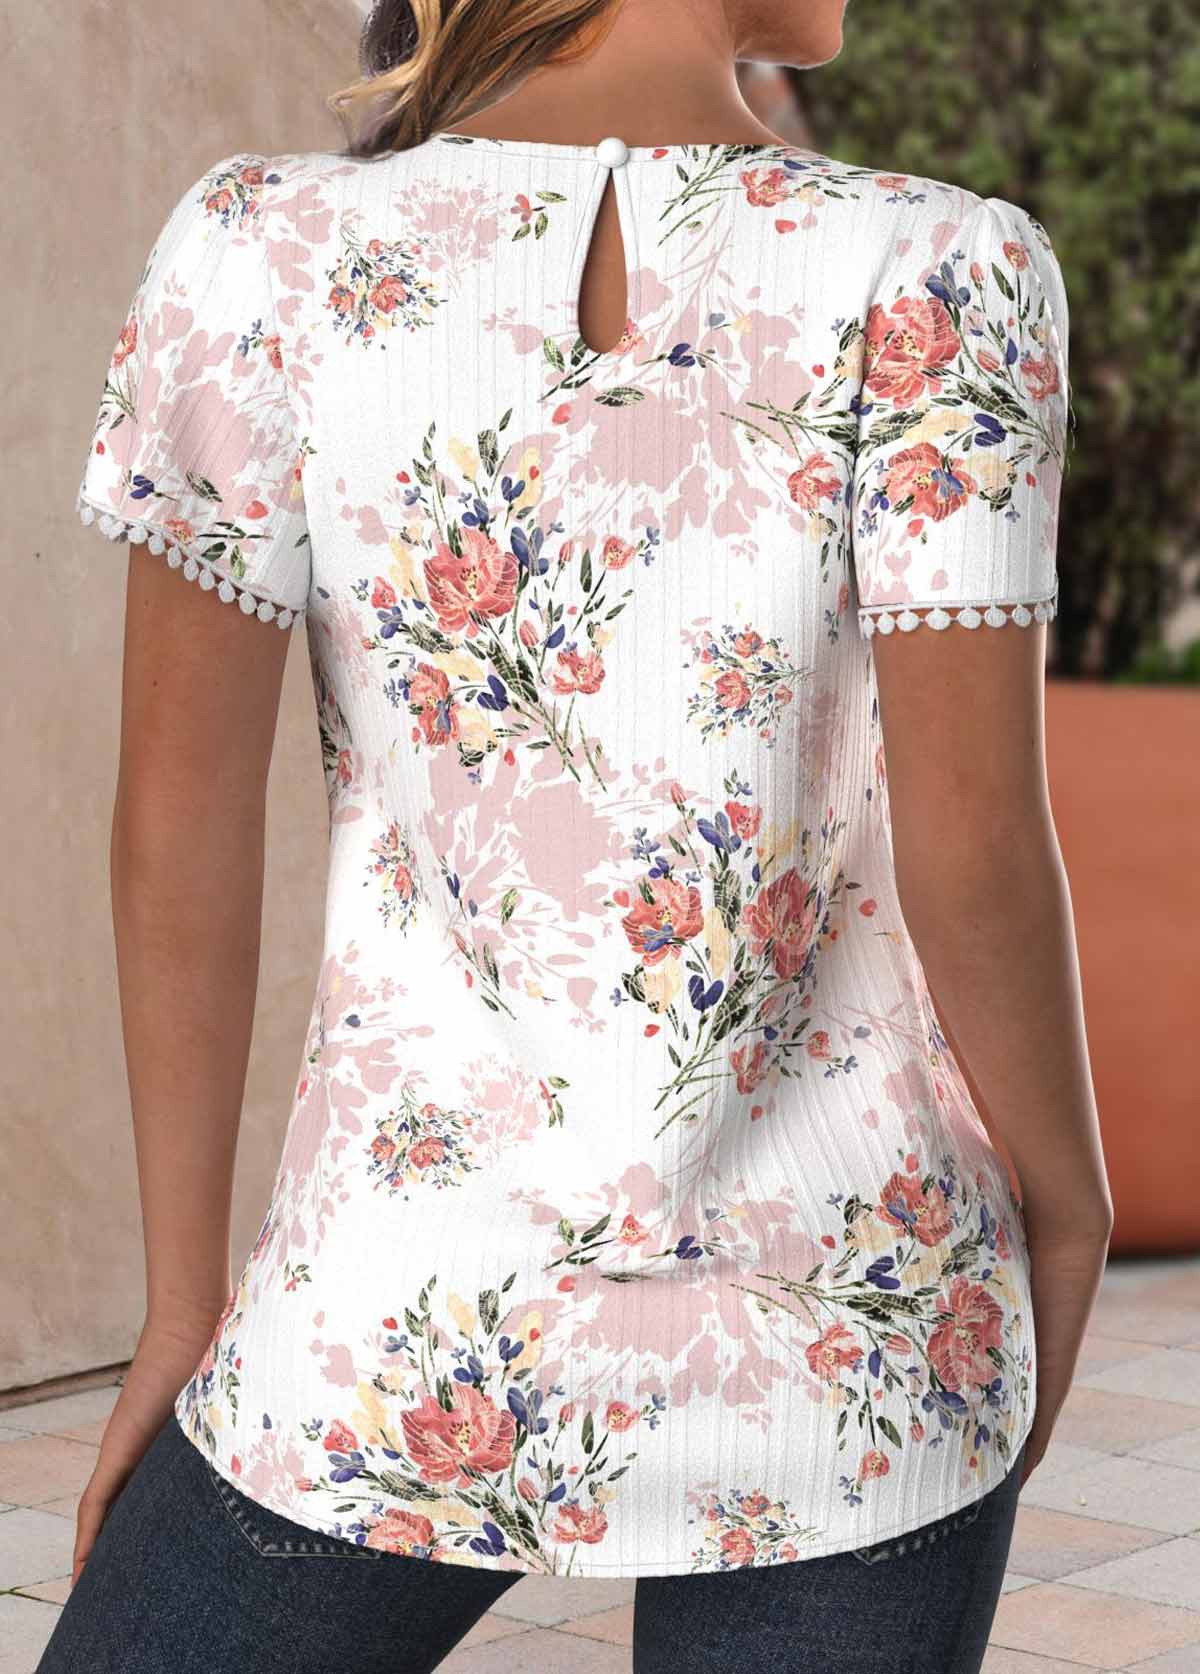 Floral Print Textured Fabric Light Pink Short Sleeve Blouse